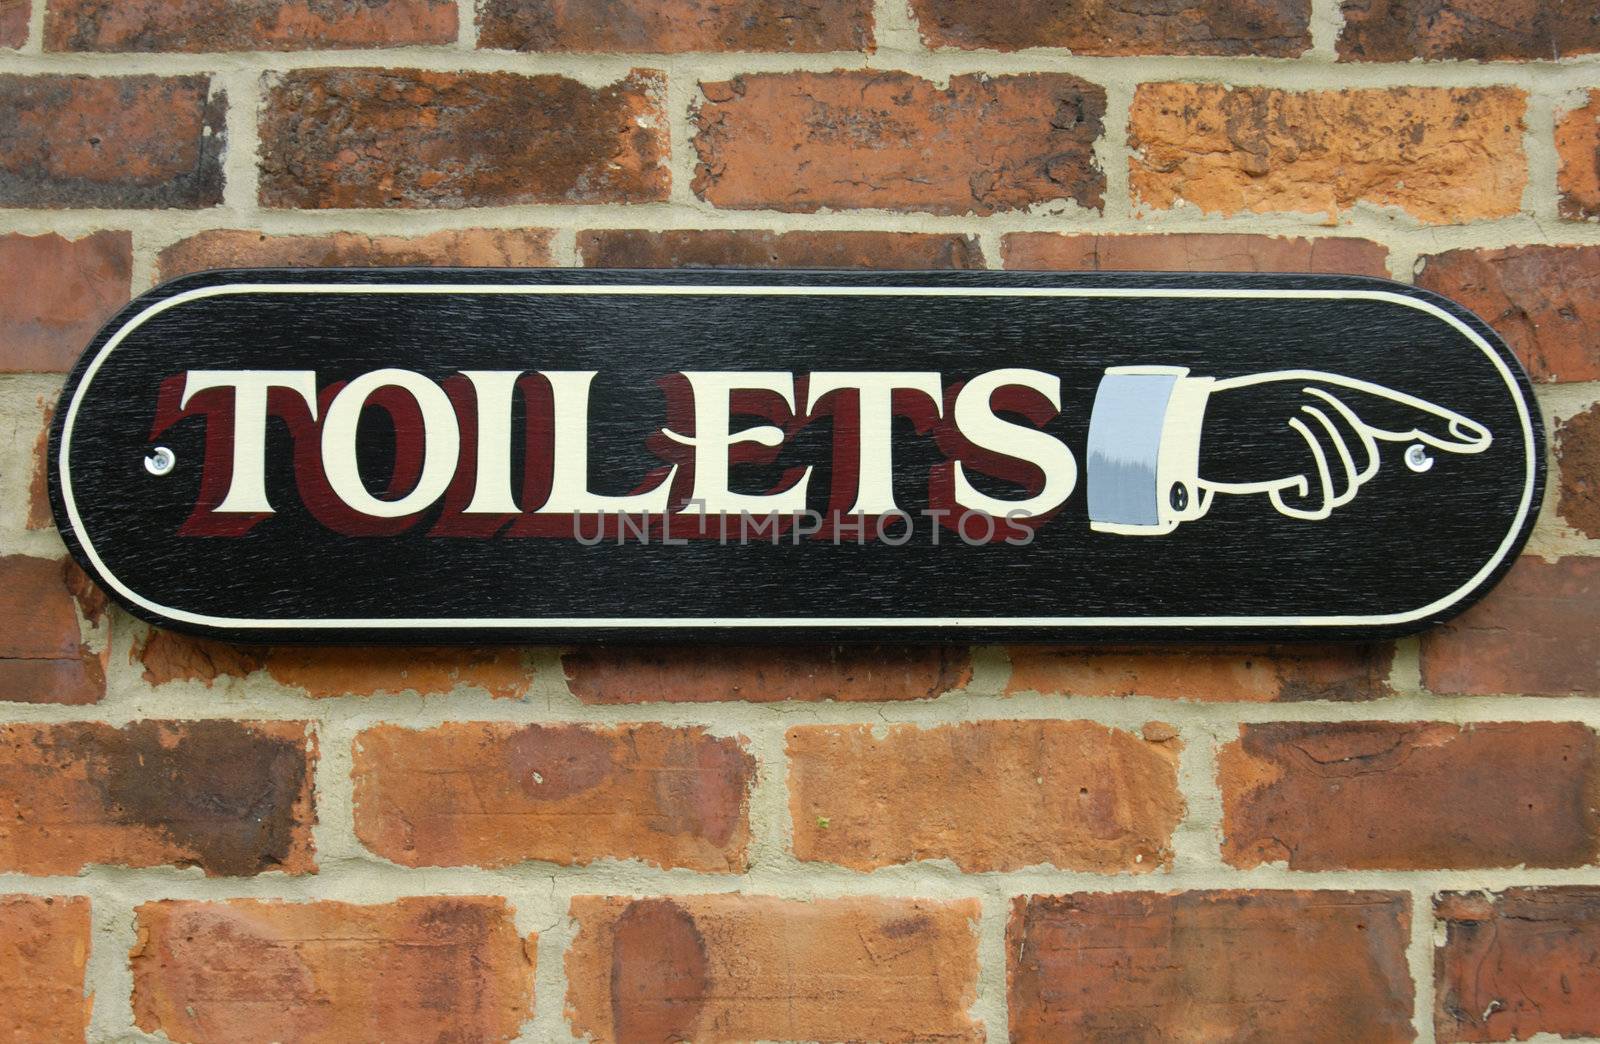 Toilets sign (with clipping path) by Bateleur